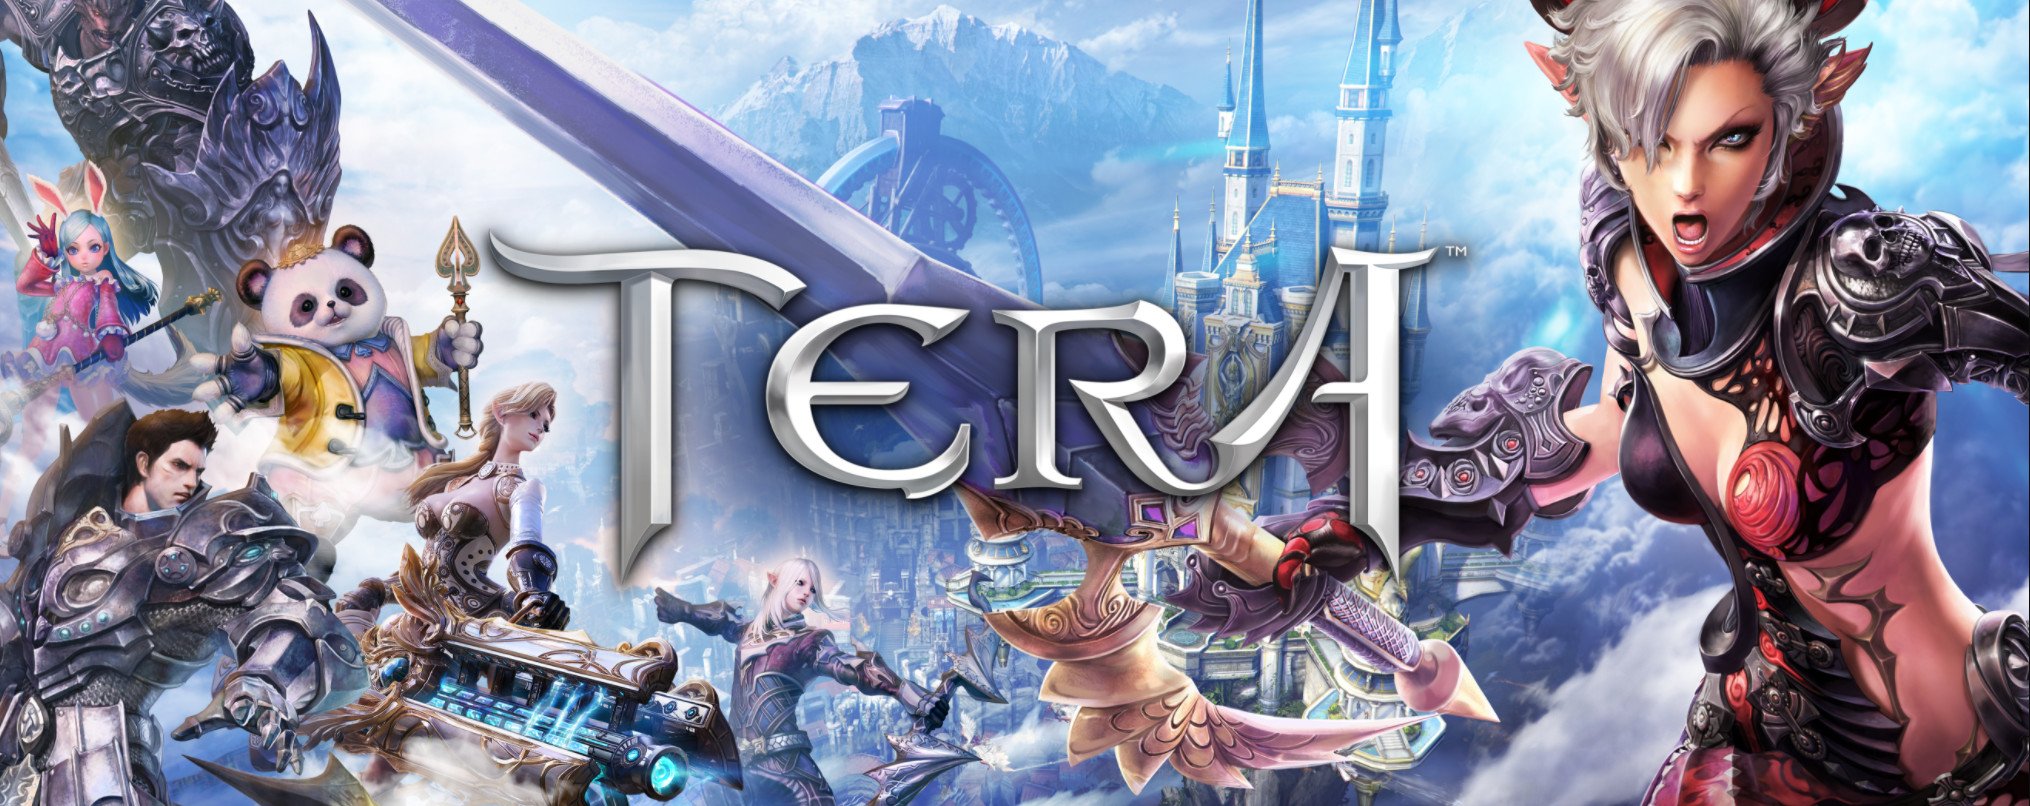 TERA PlayStation 4: 15 tips, tricks, other things you should know | Android Central